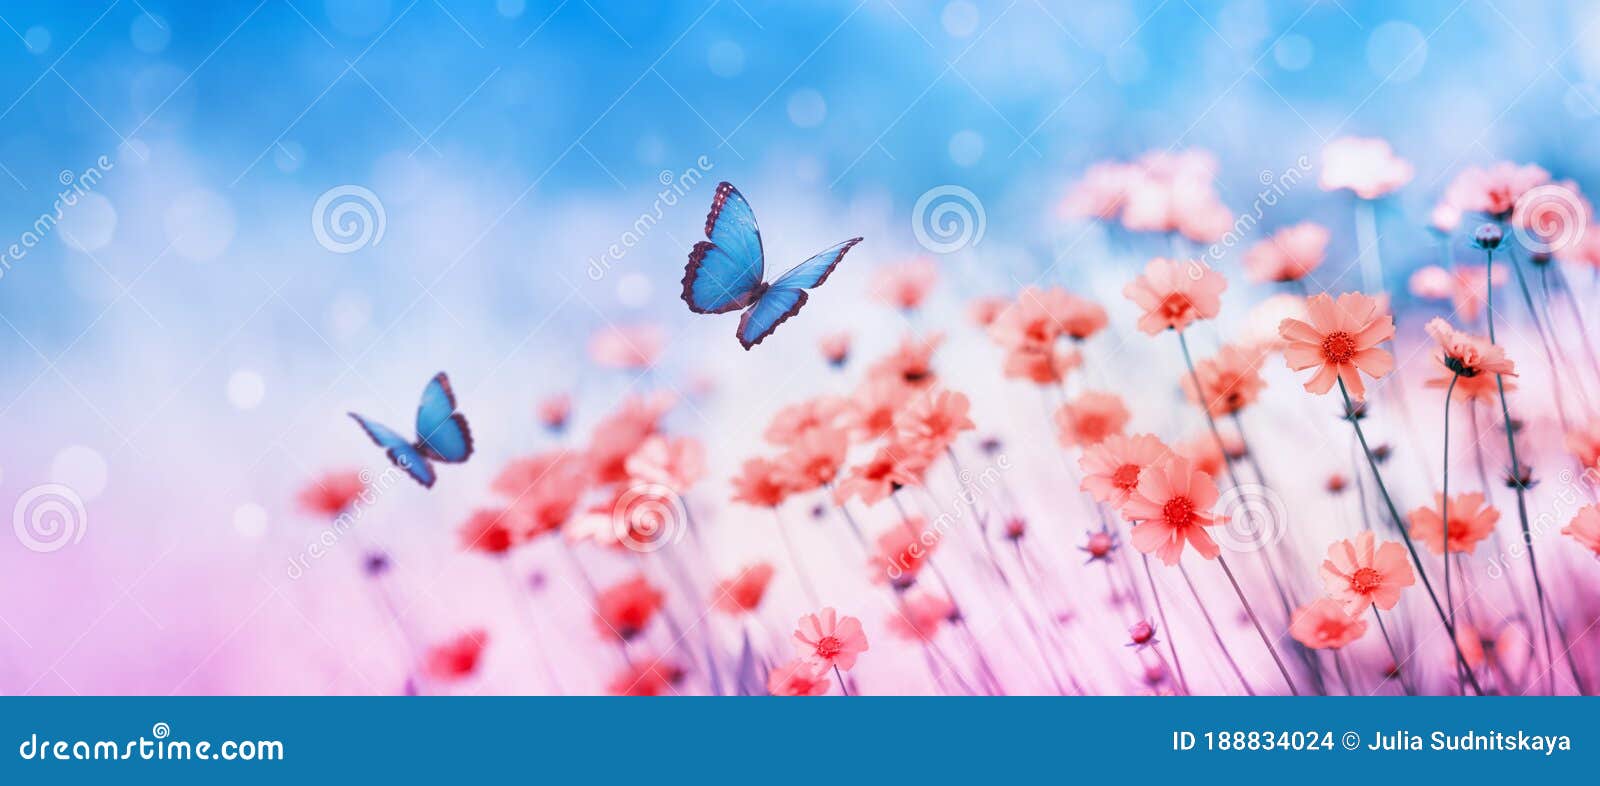 beautiful flower field and flying butterflies on blue sky background. colorful toning of amazing nature landscape with wild plants